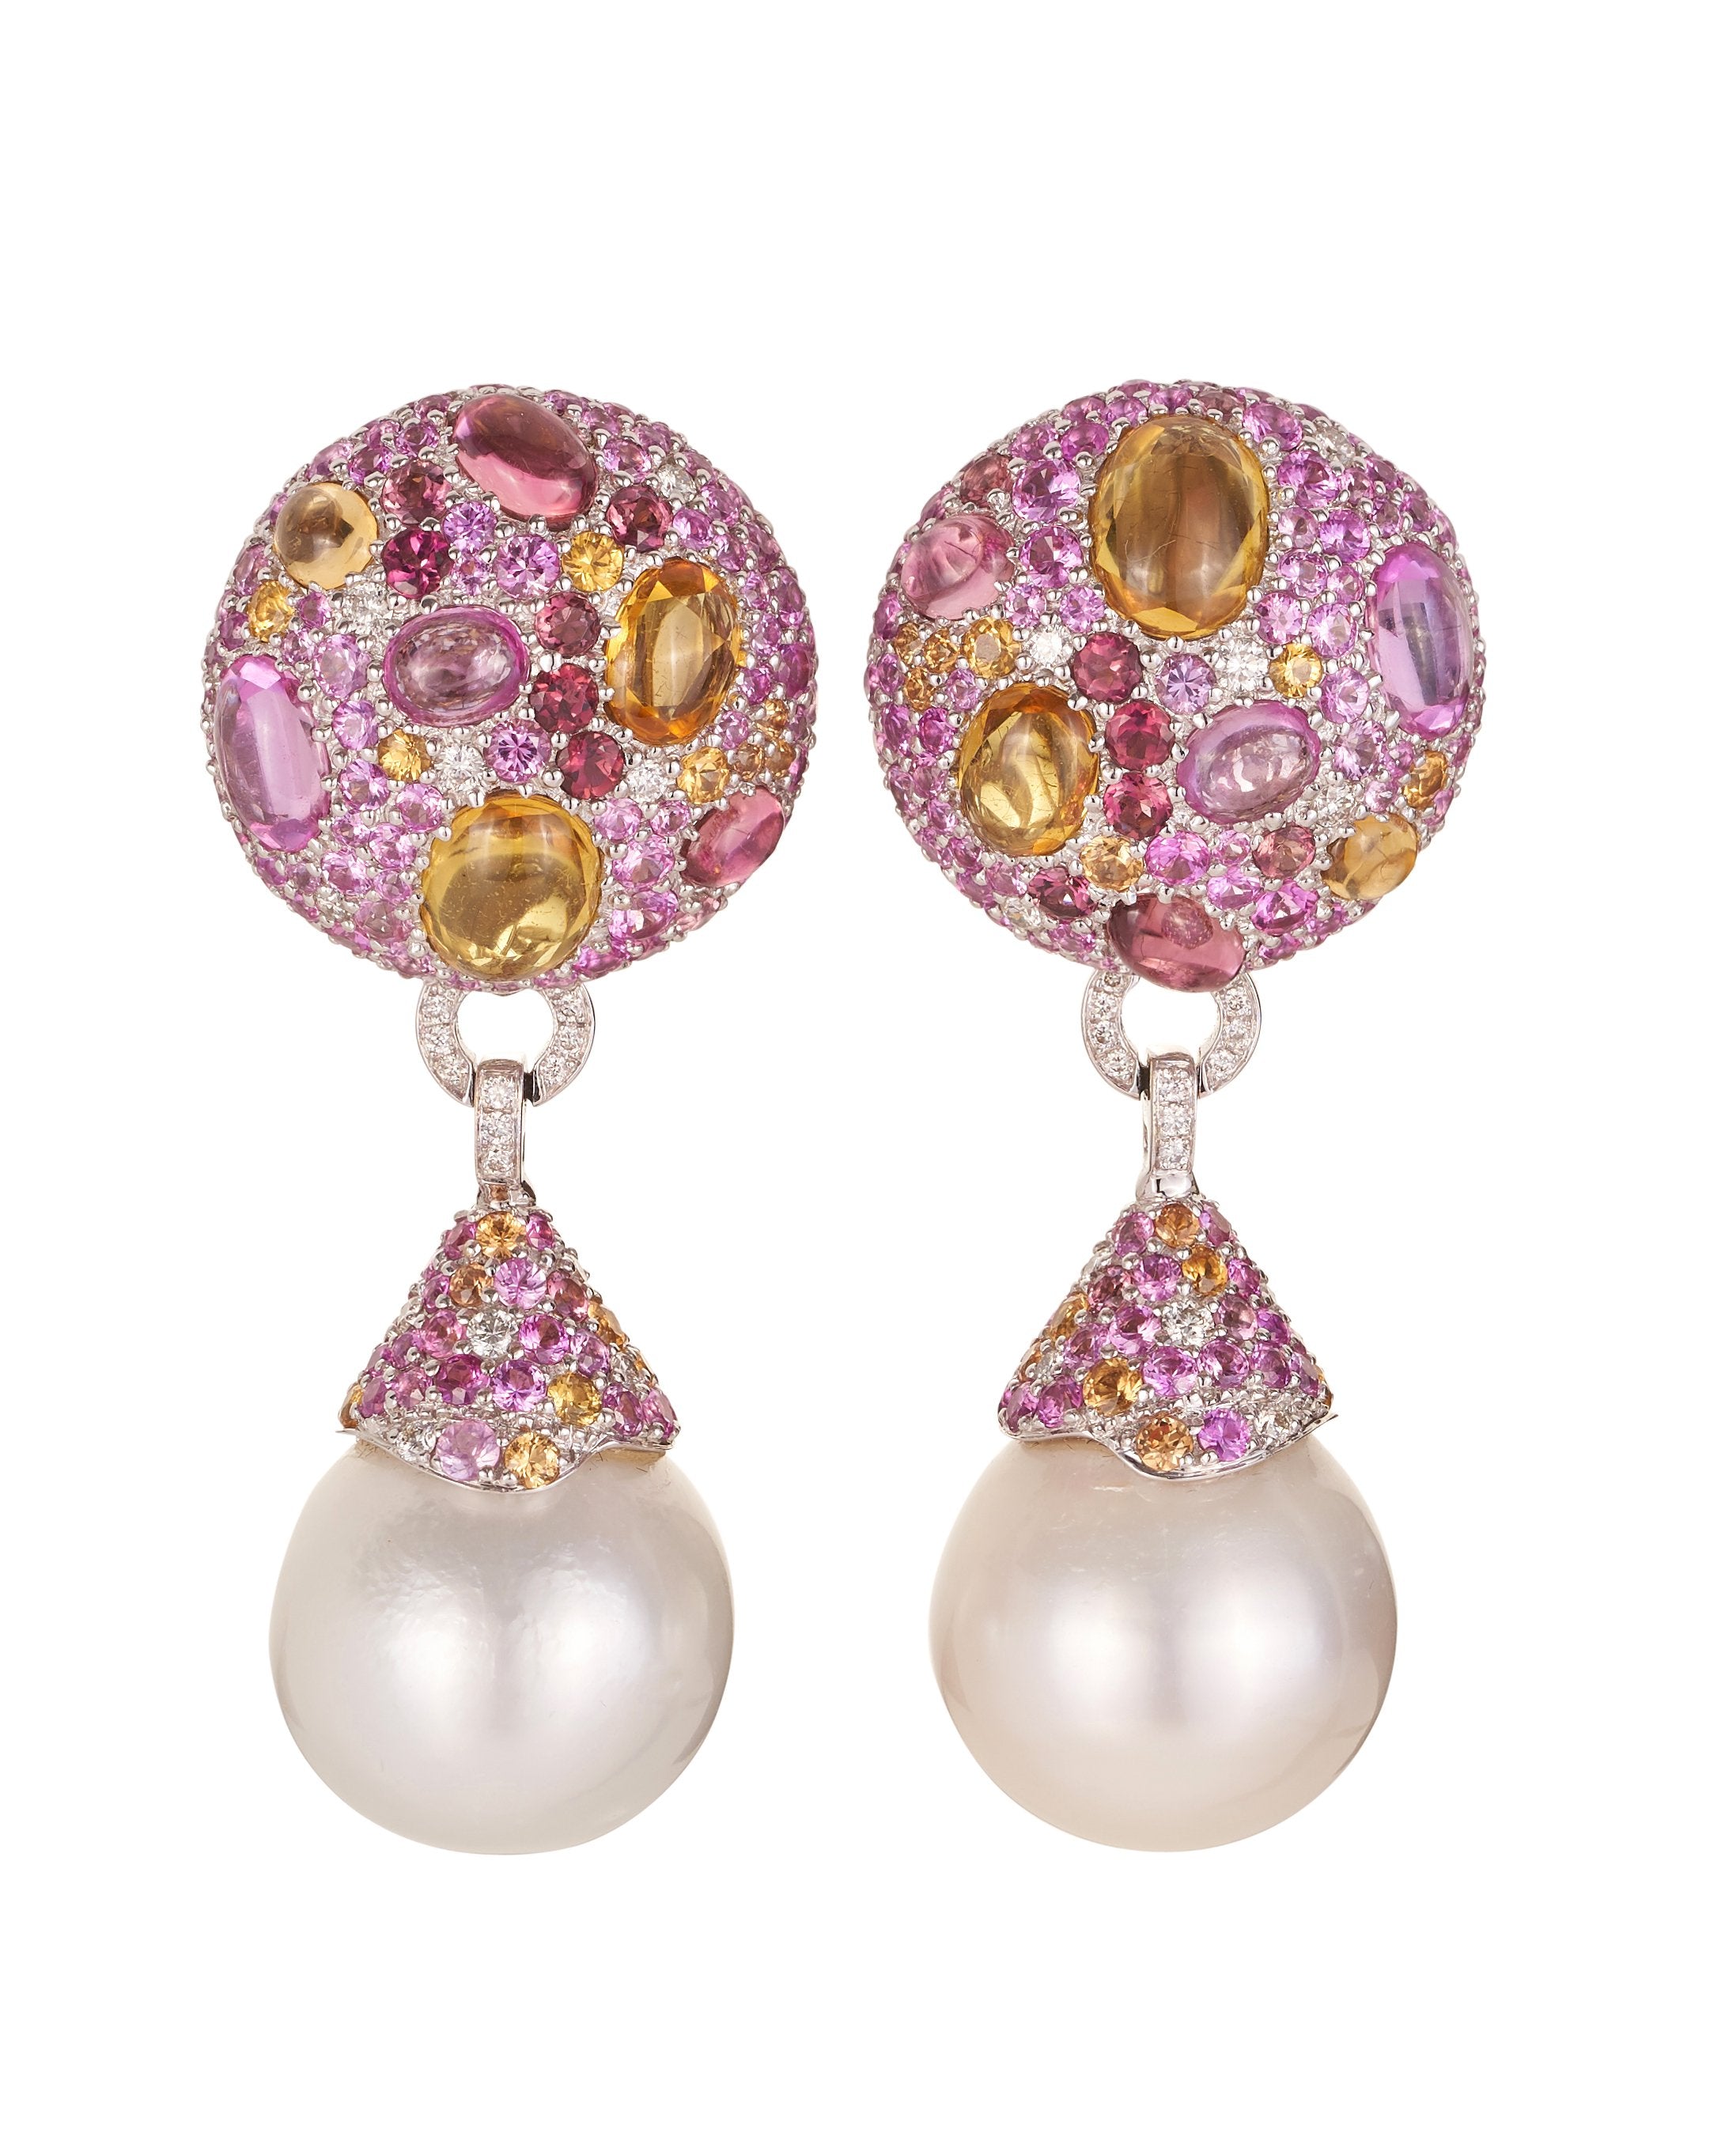 "Cookie" pink sapphire earrings, featuring capped South Sea Pearl pendant drops, crafted in 18 karat white gold.